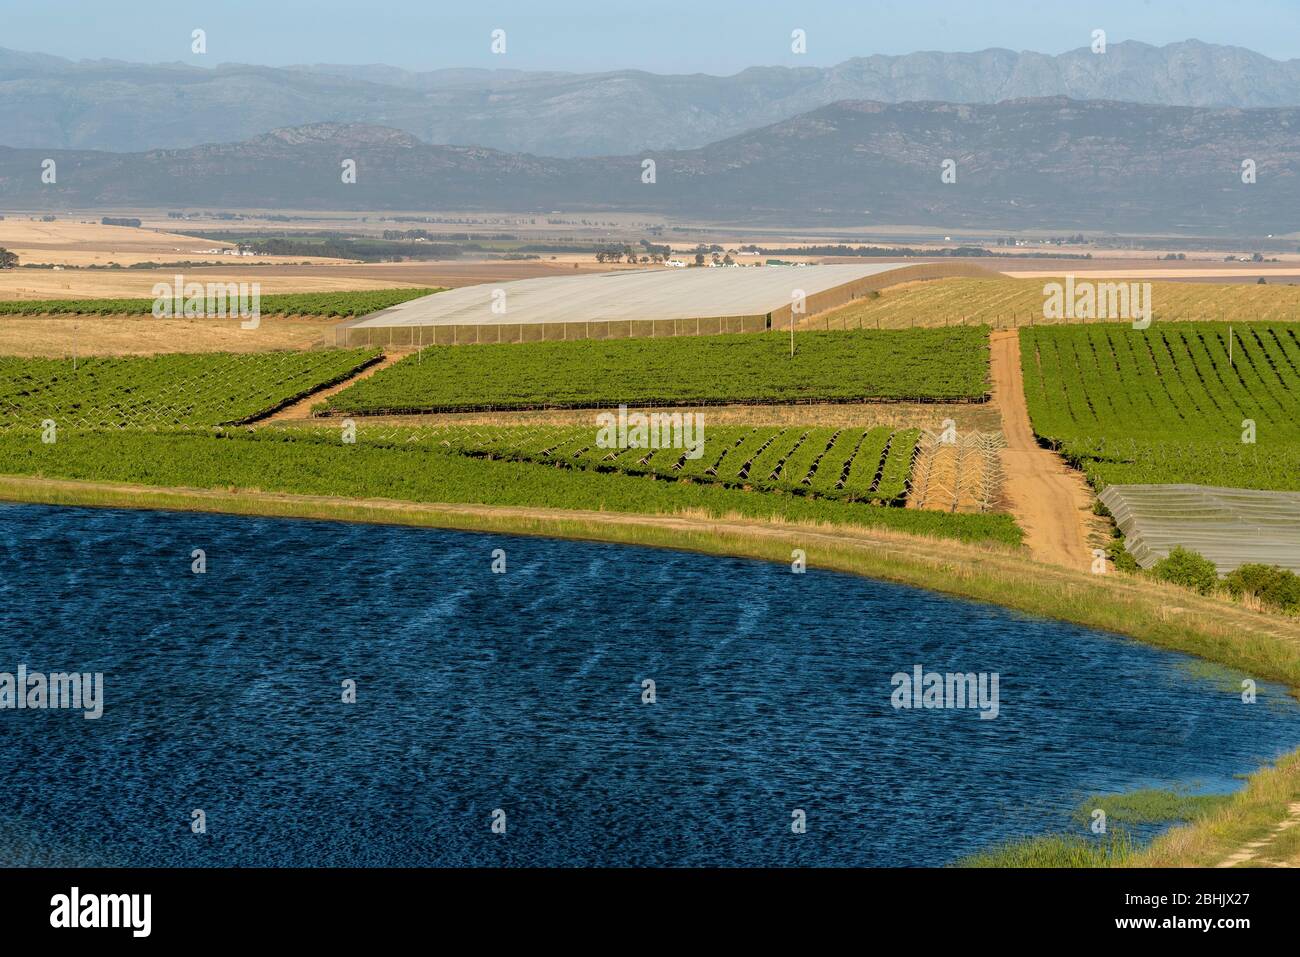 Riebeek Kasteel, Swartland, South Africa. 2019. Overview of the vineyards and wheat producing farms looking towards Gouda in the Swartland region. Stock Photo